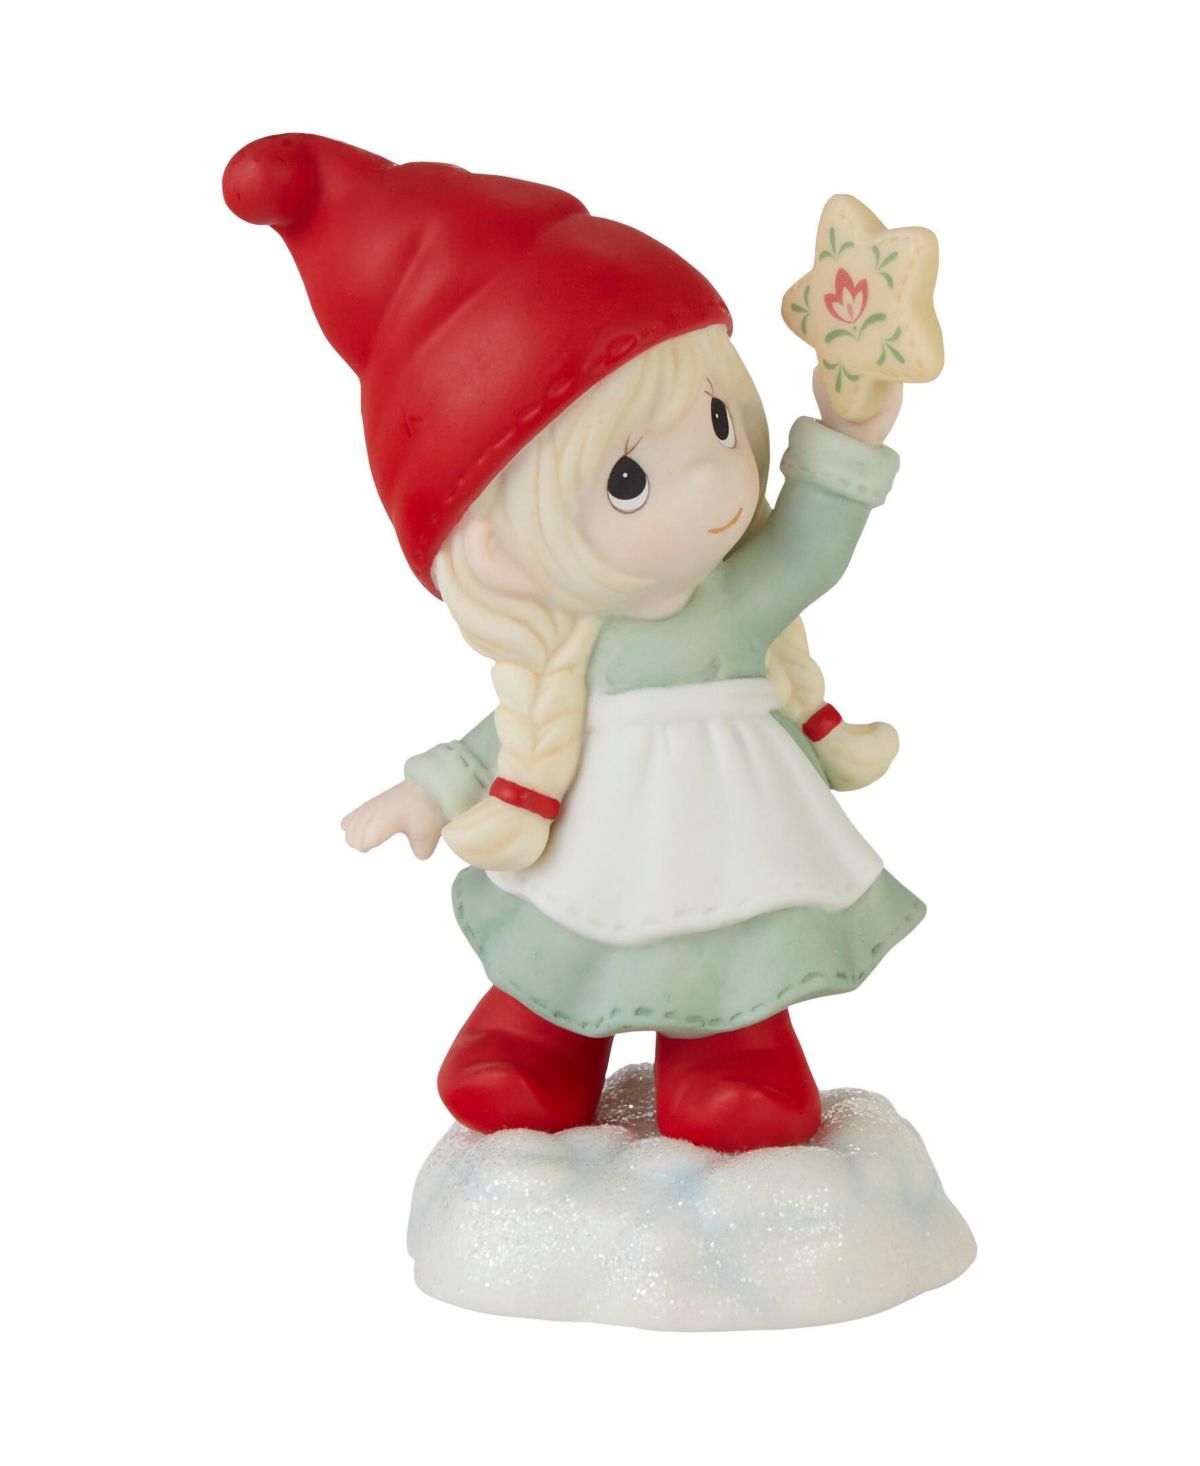 Precious Moments The First Goel Bisque Porcelain Figurine In Multicolored